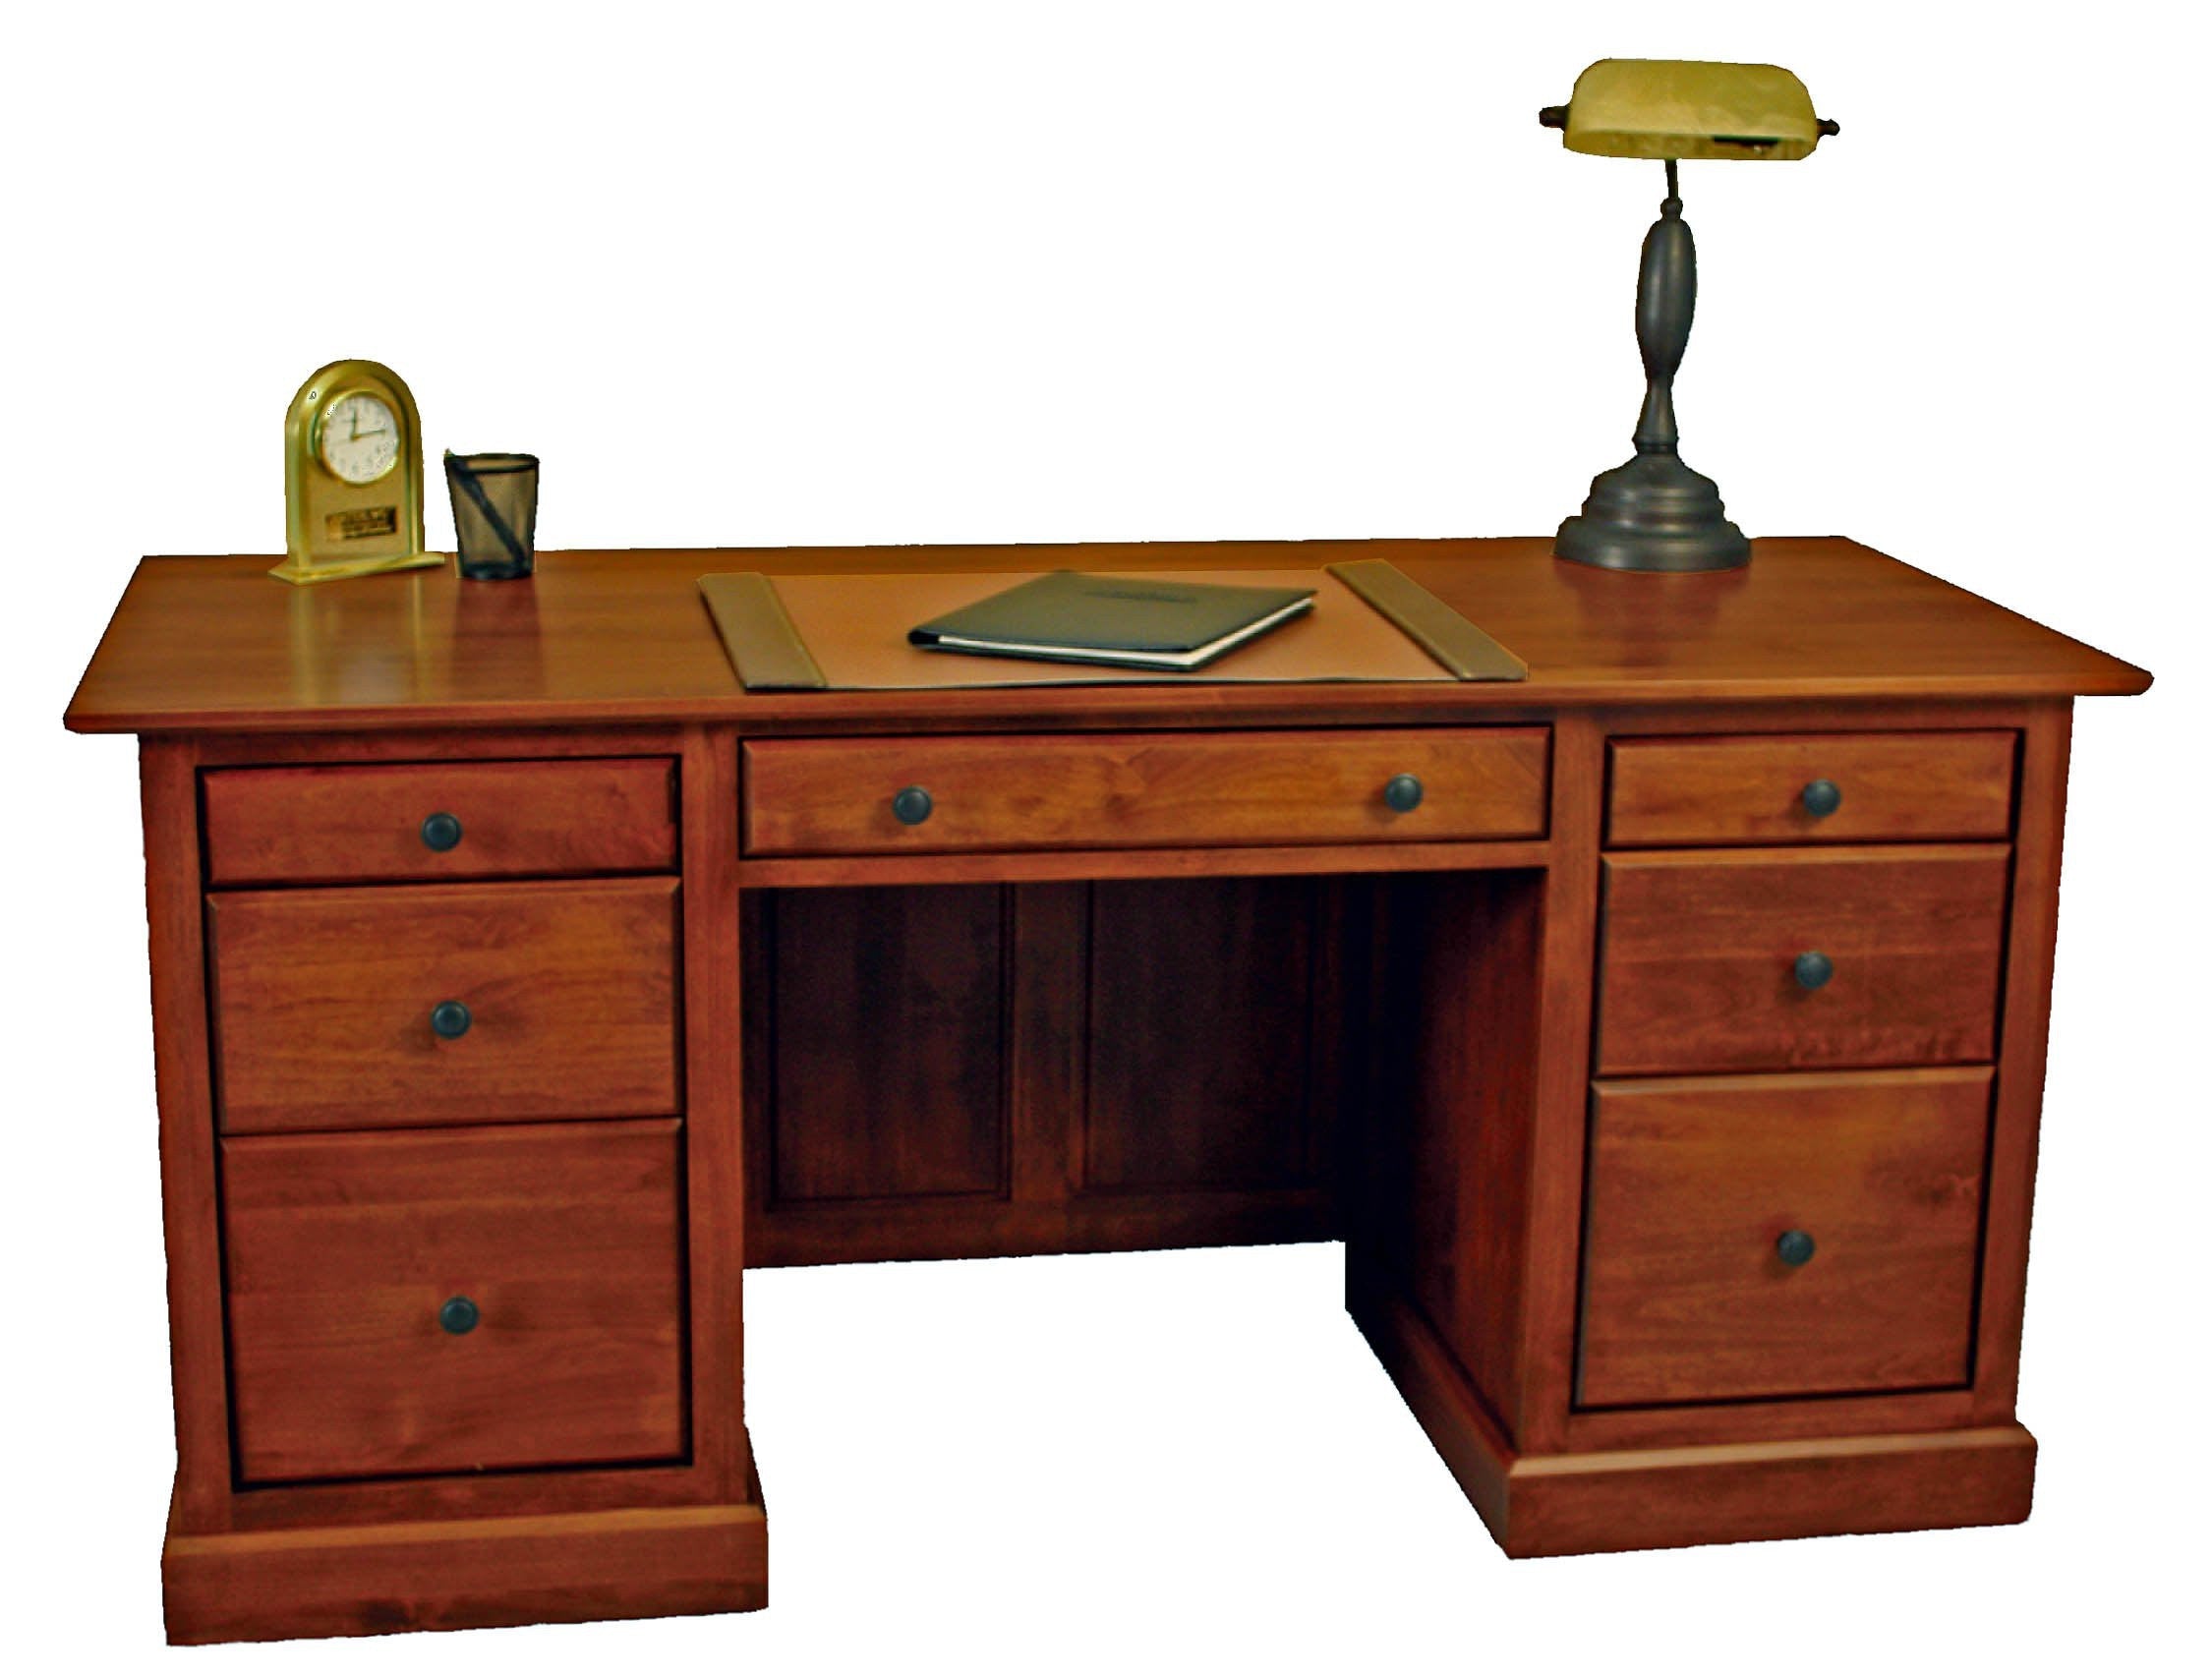 [64 Inch] Alder Shaker Executive Desk - shown in Antique Cherry finish and Antique Bronze knobs